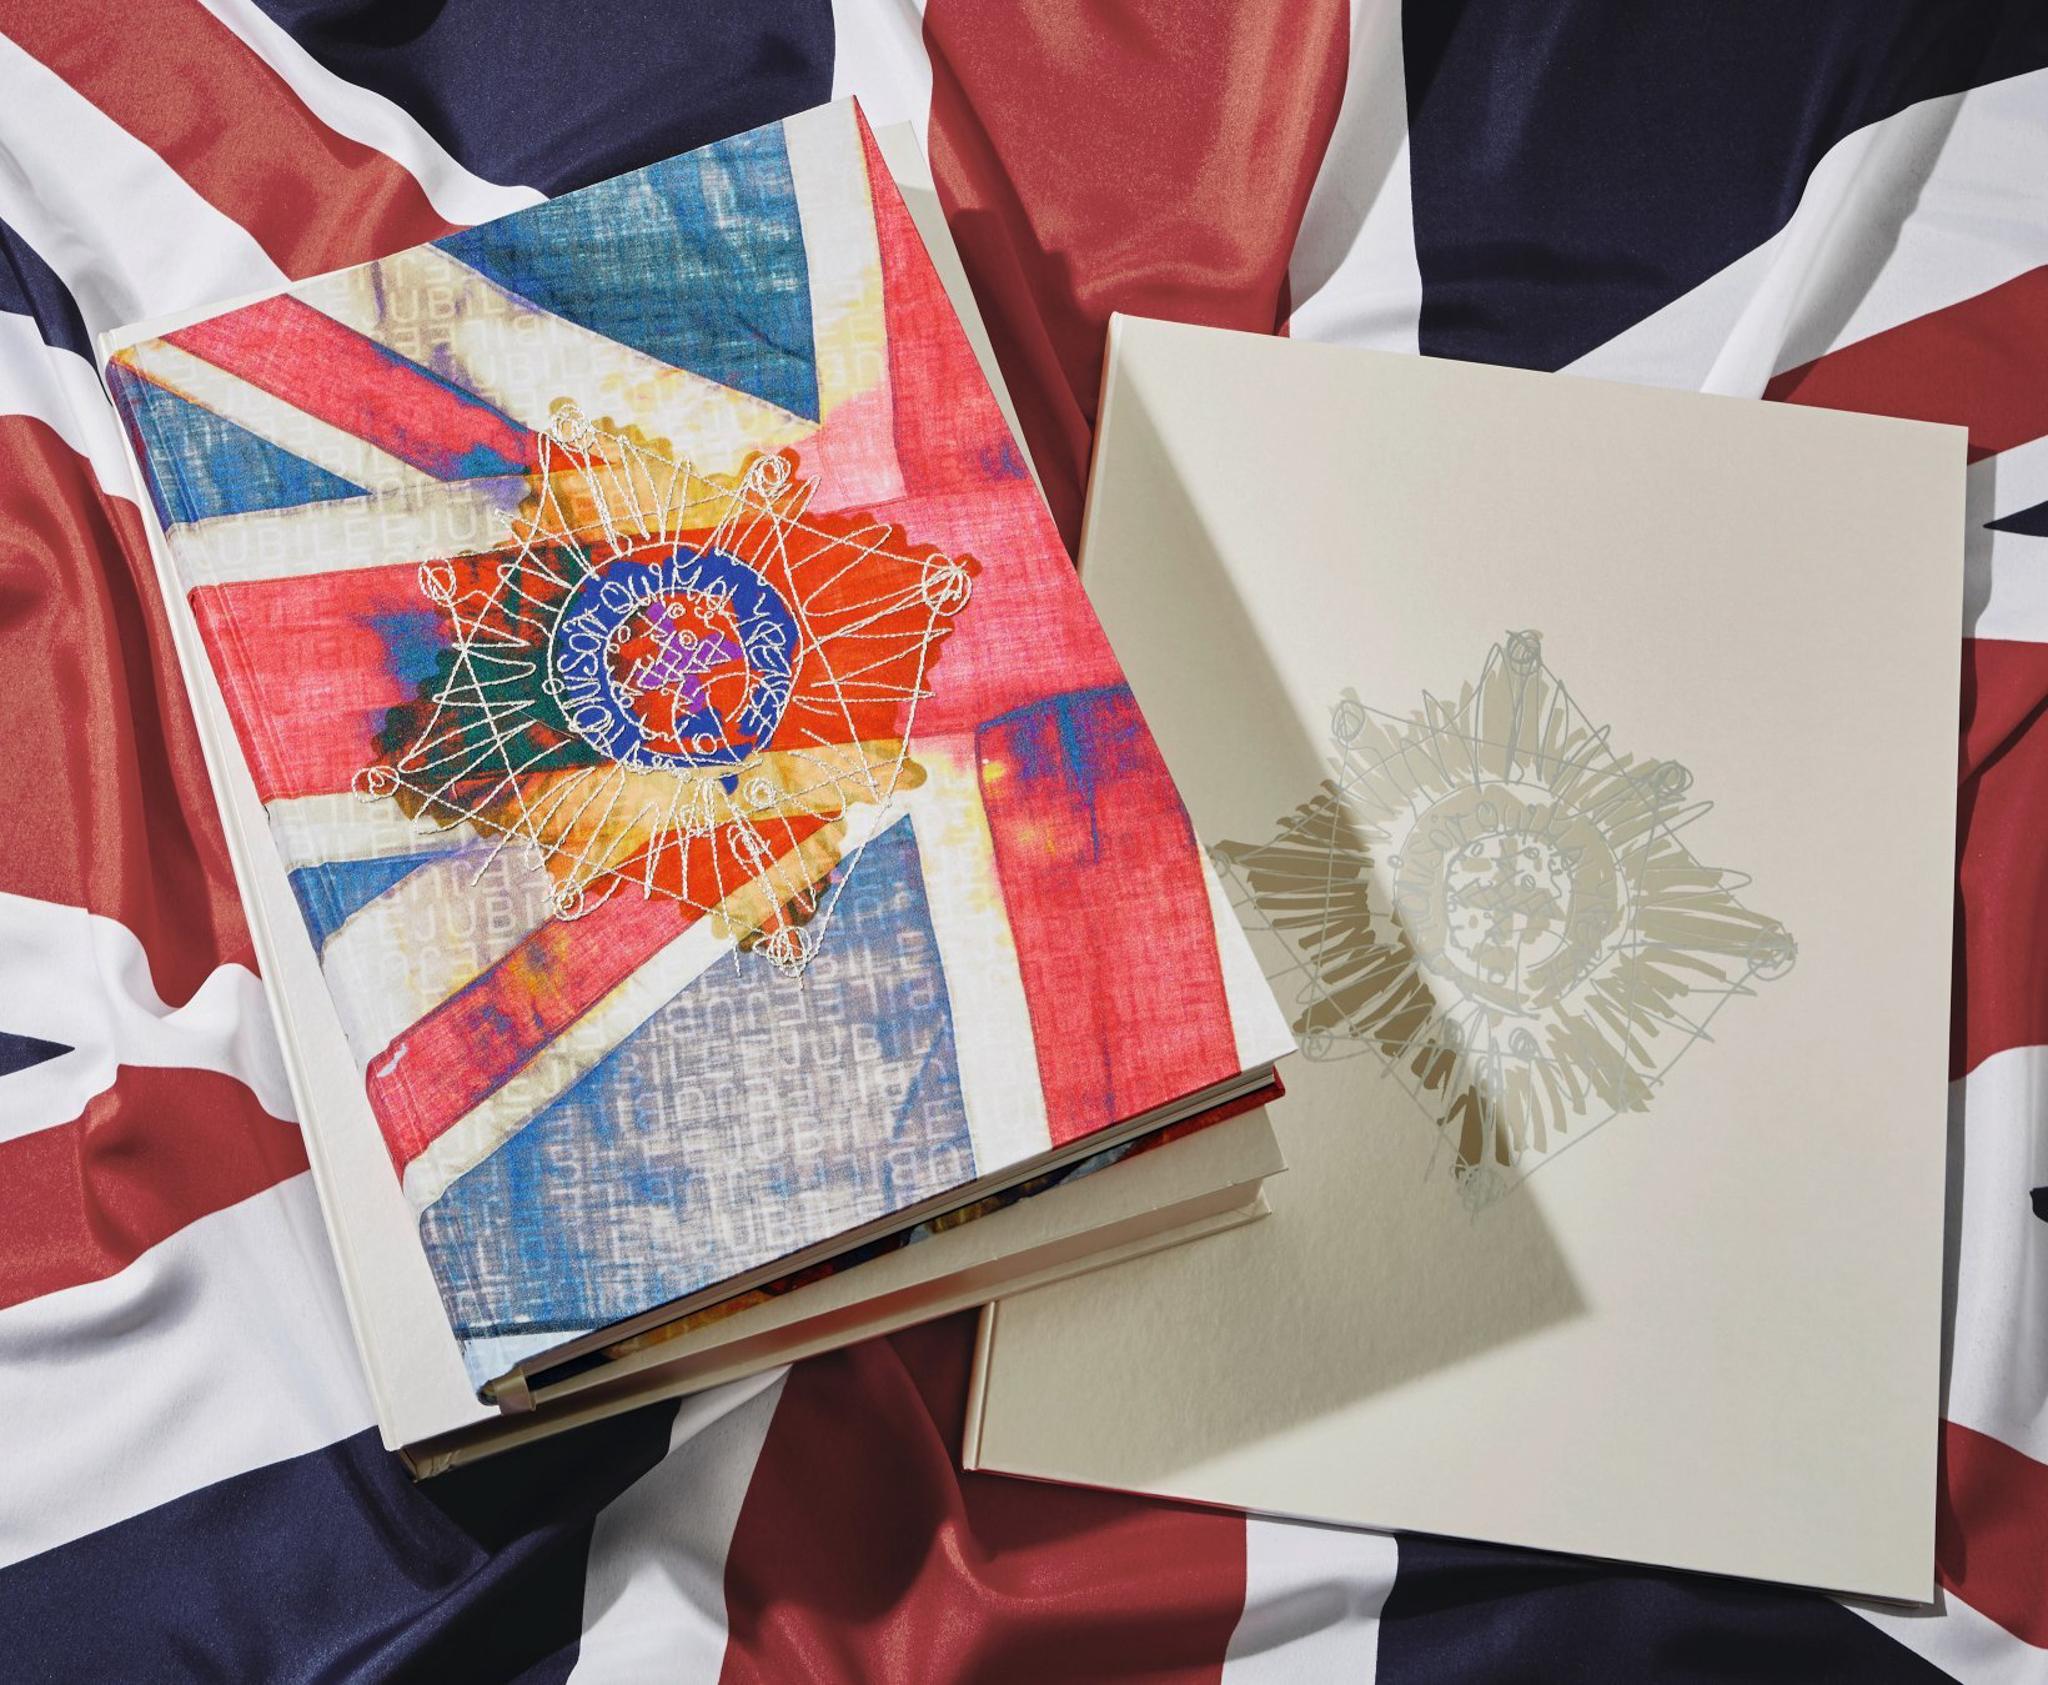 Her Majesty
Art Edition B: Royal Departure

Super Rare Artist's Proof (AP 063)
Incl. Harry Benson's Originally Signed Gelatin Silver Print
Completely New & Factory-Sealed

TASCHEN  2013

Art Edition of 500 copies + 50 artist's proofs (APs), each